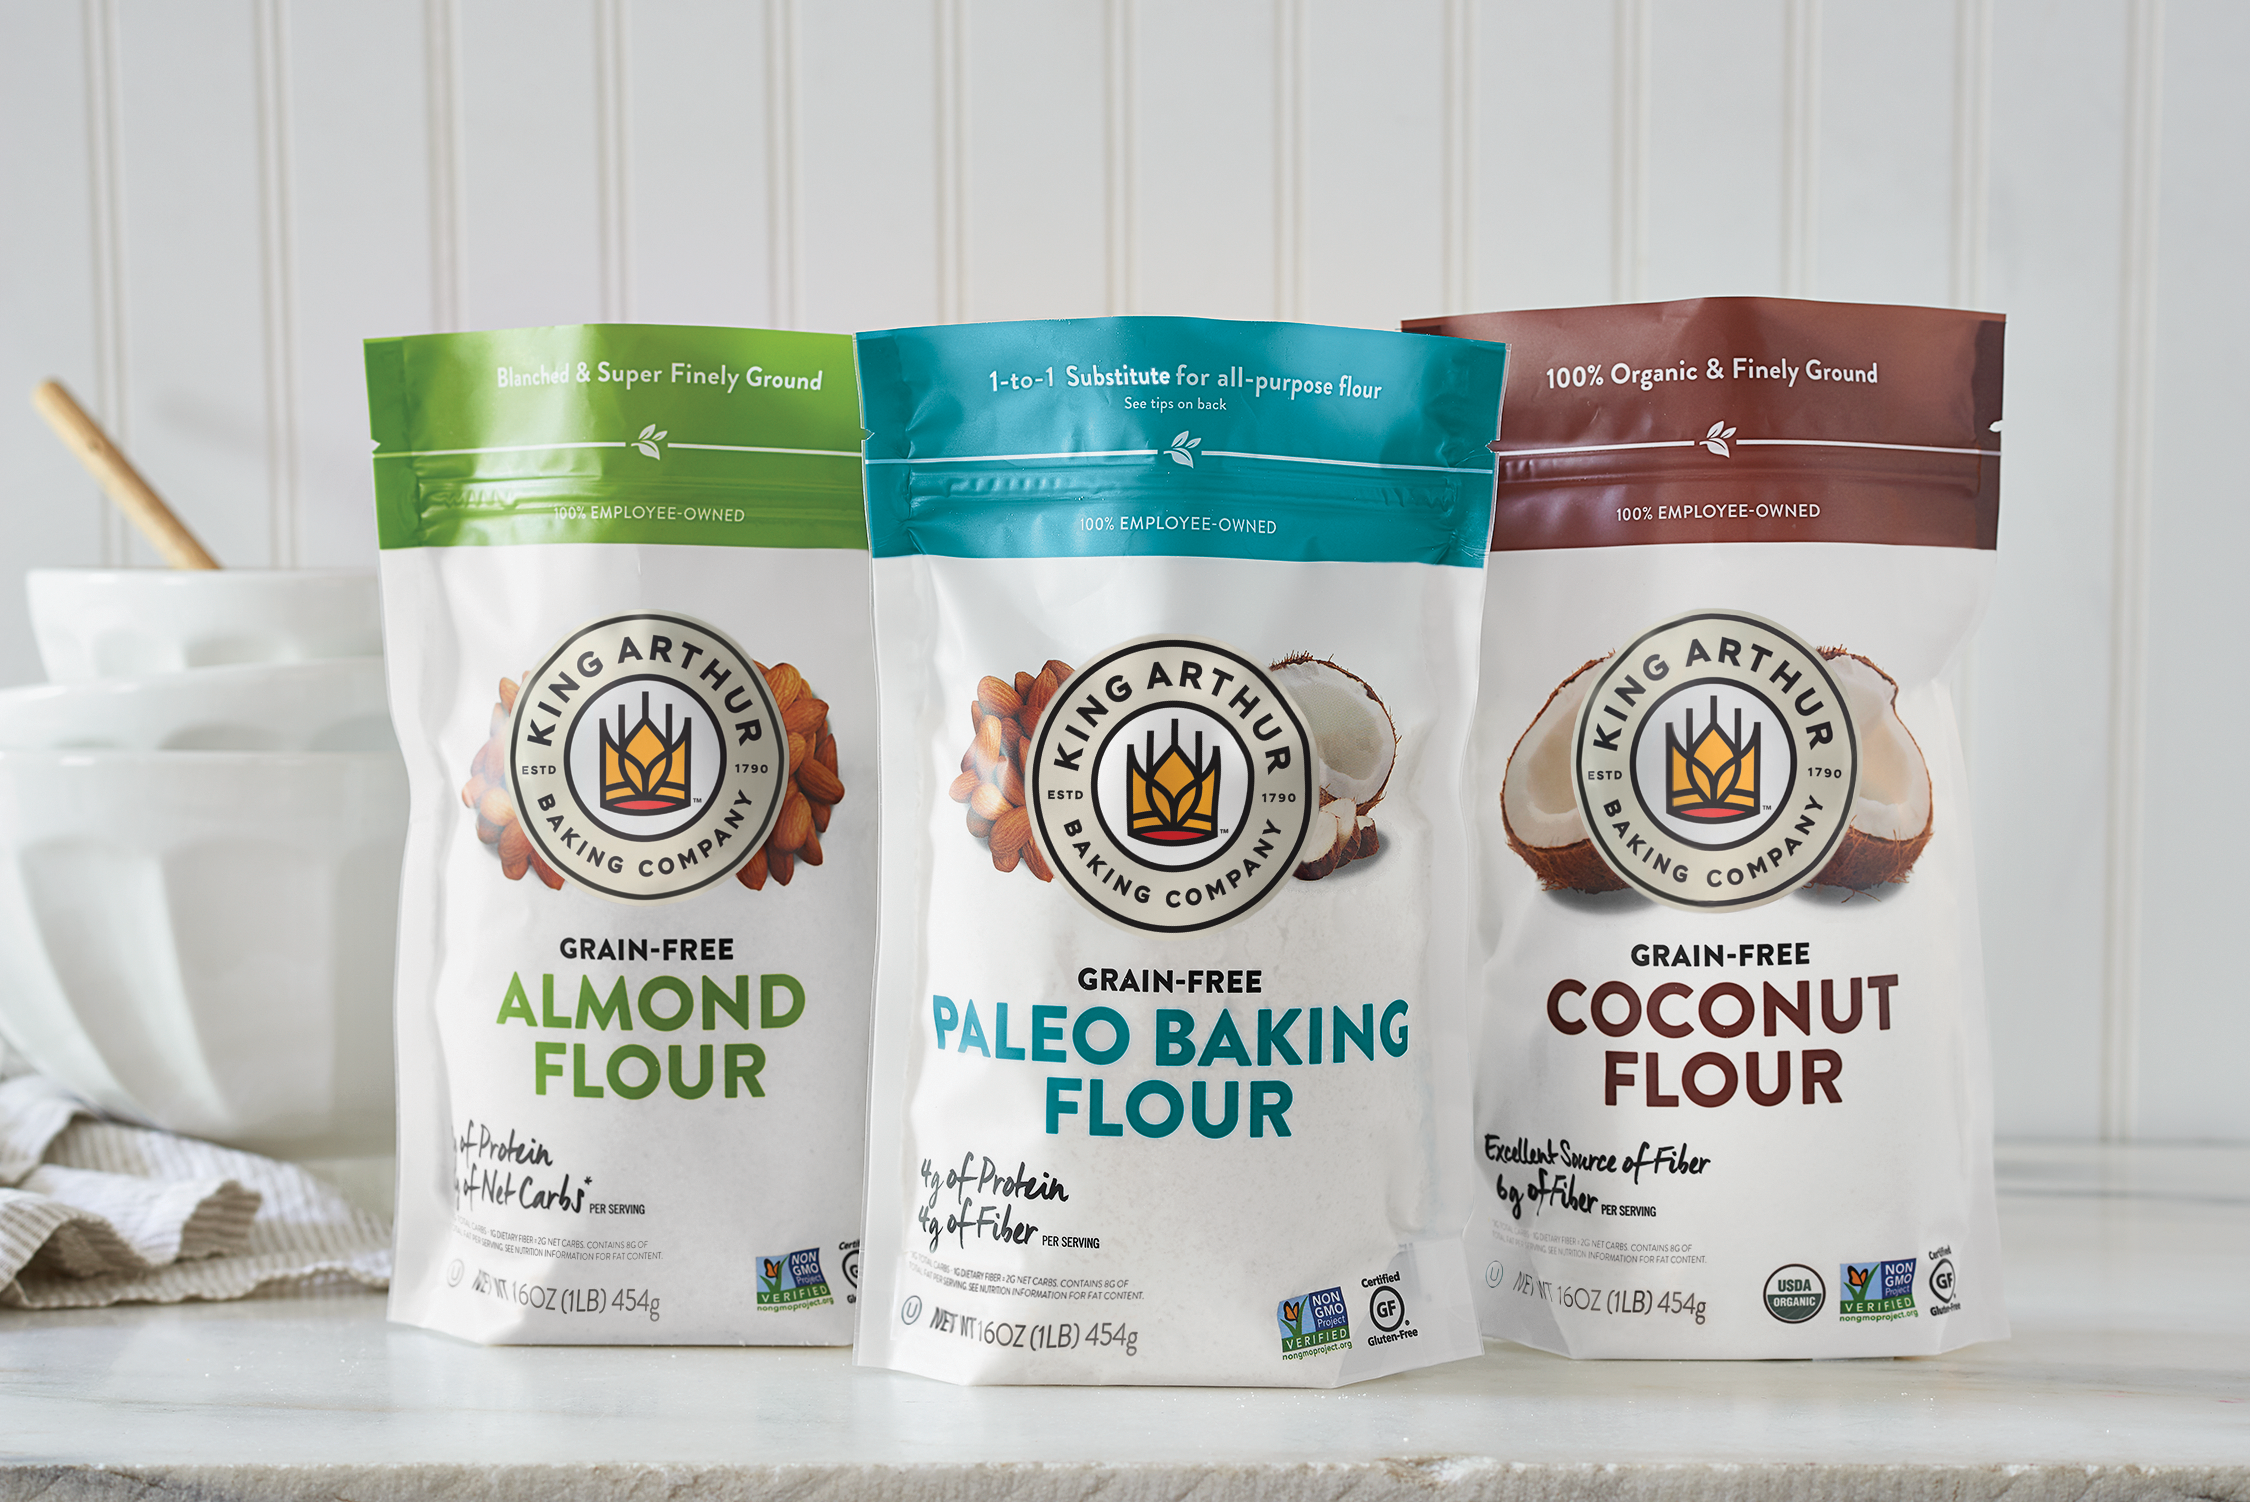 Line of grain free flours featuring updated King Arthur Baking Company logo